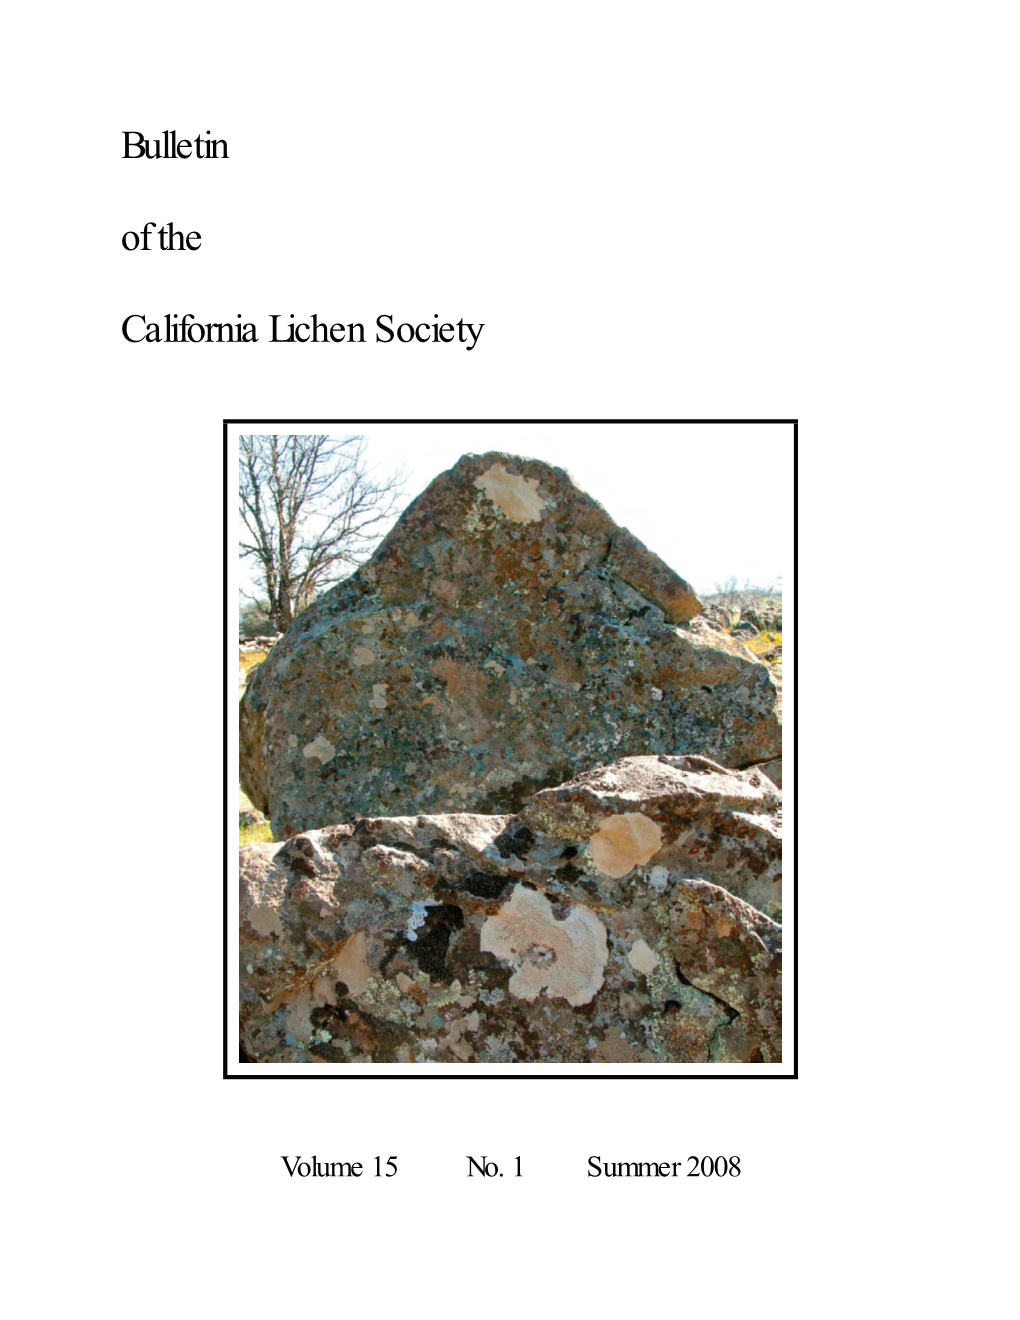 Summer 2008 the California Lichen Society Seeks to Promote the Appreciation, Conservation and Study of Lichens